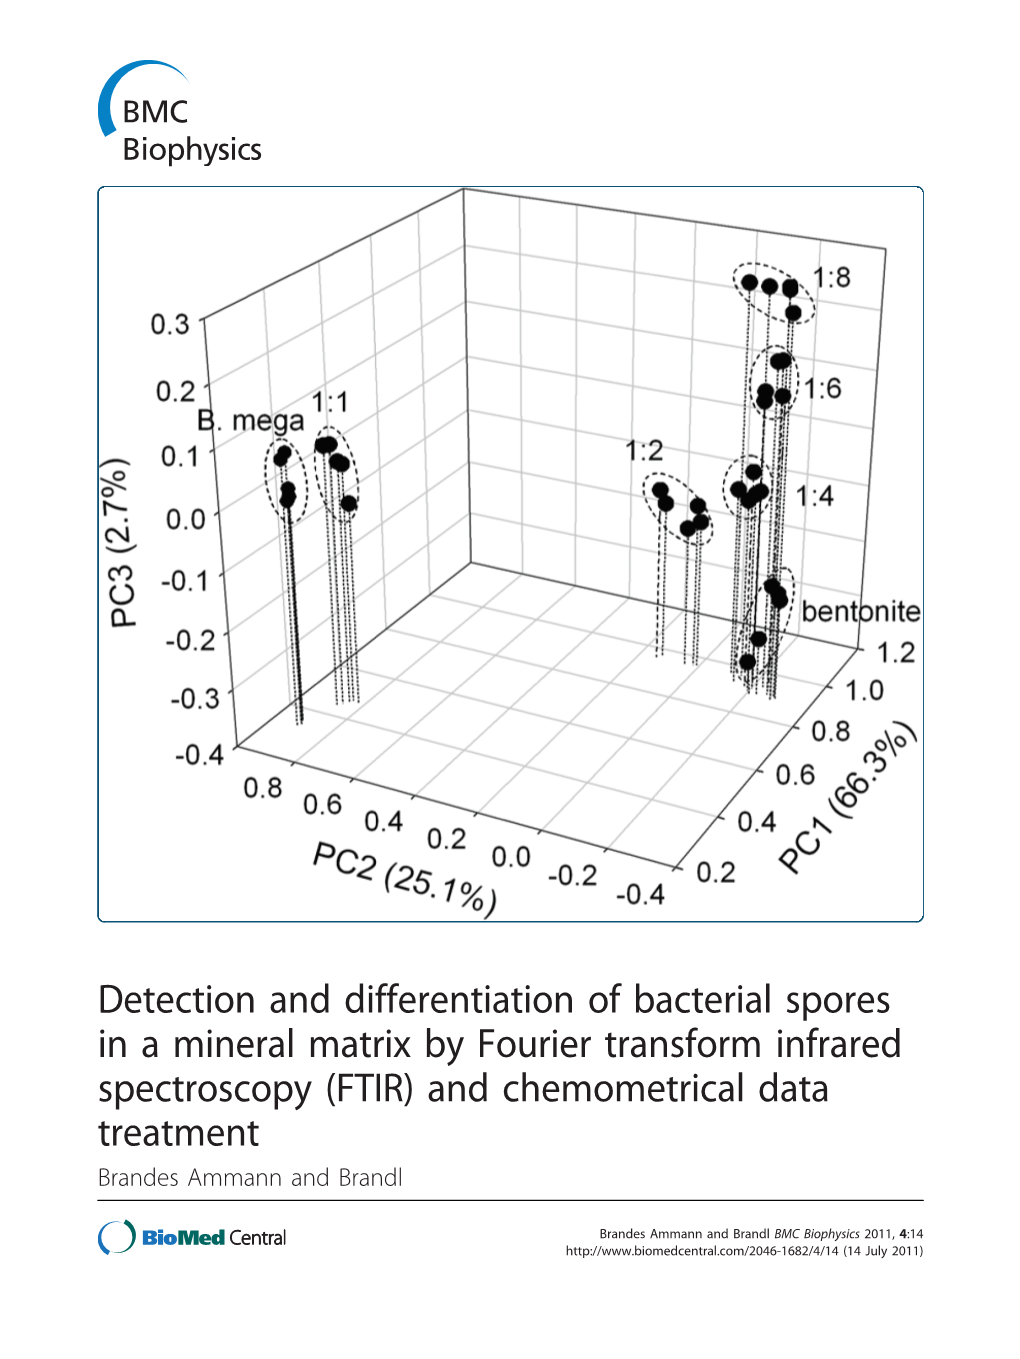 Detection and Differentiation of Bacterial Spores in a Mineral Matrix by Fourier Transform Infrared Spectroscopy (FTIR) and Chem